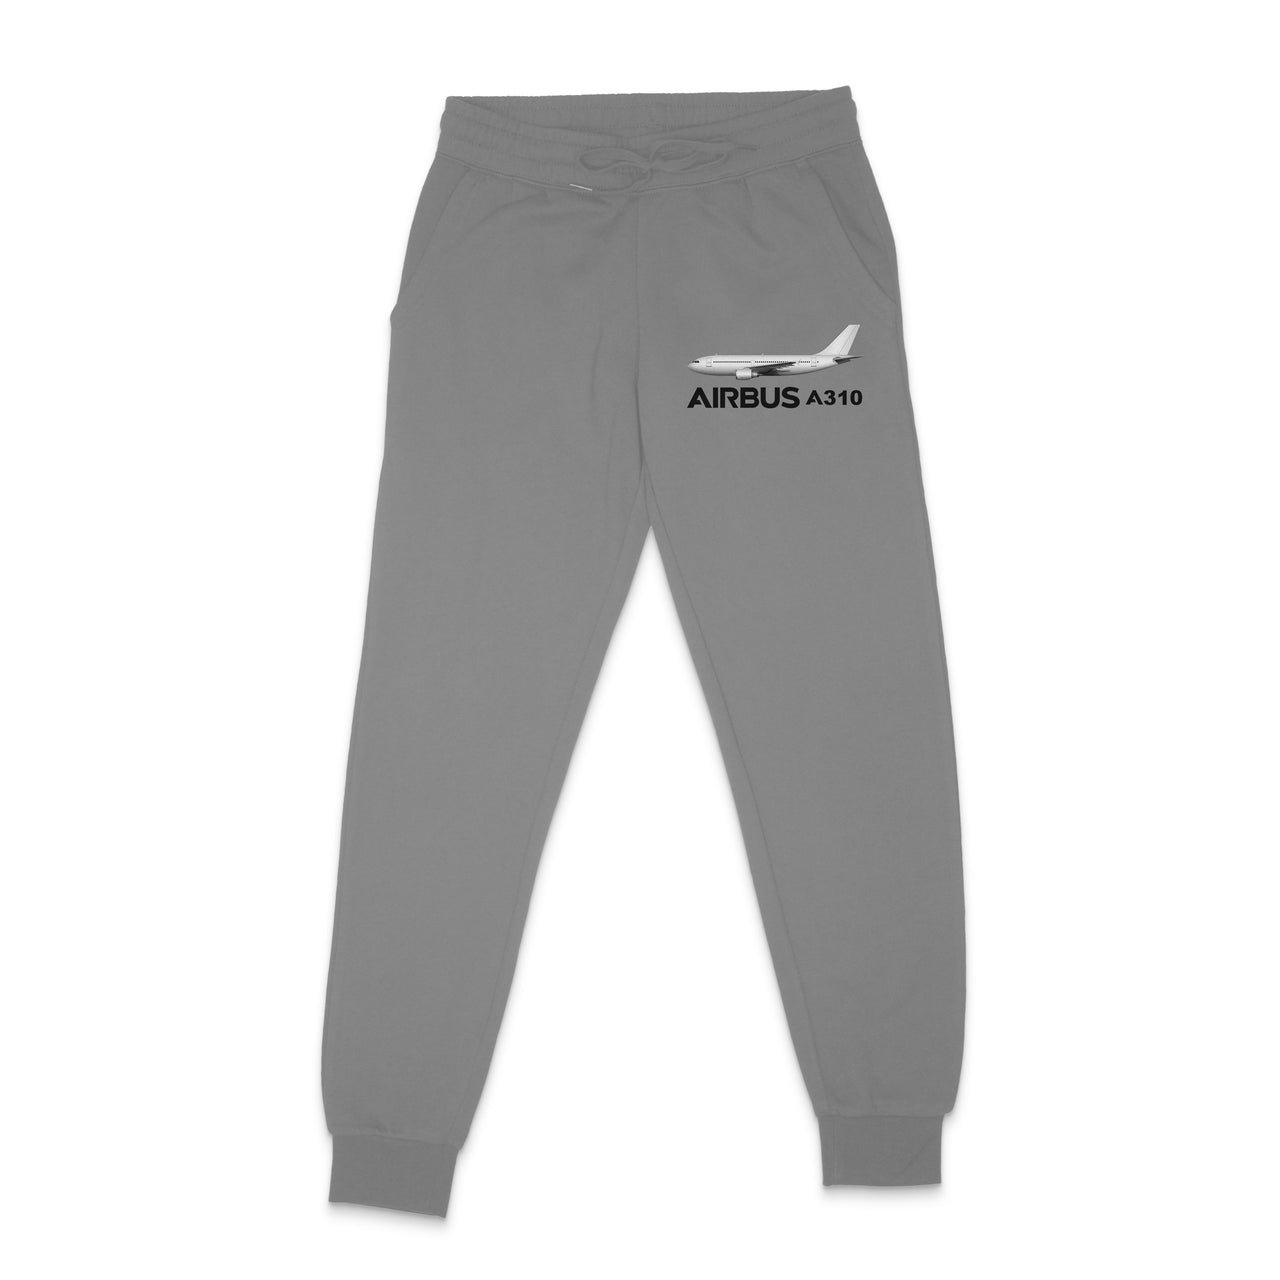 The Airbus A310 Designed Sweatpants